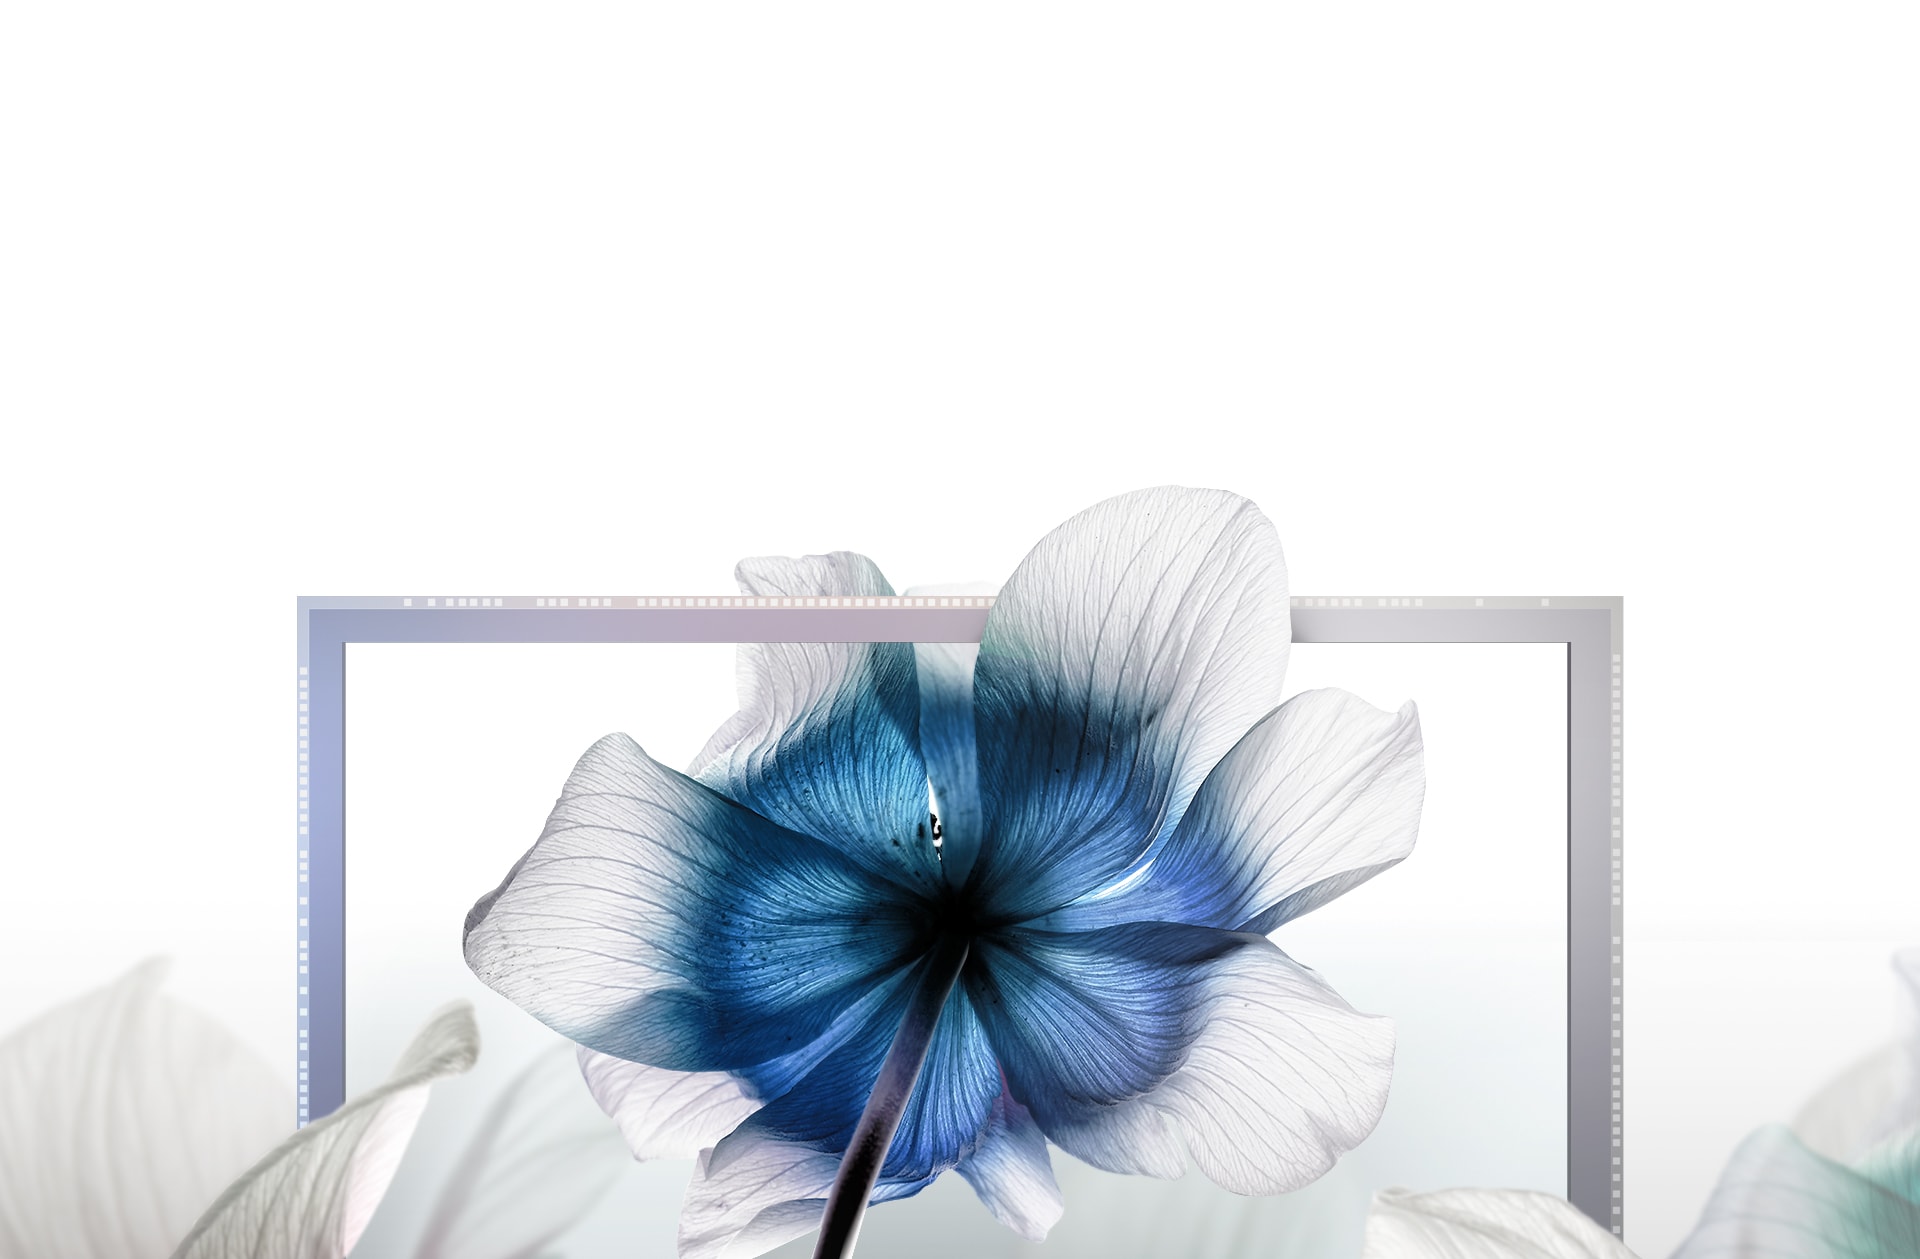  An image with ISOCELL HP1 on top of flowers.